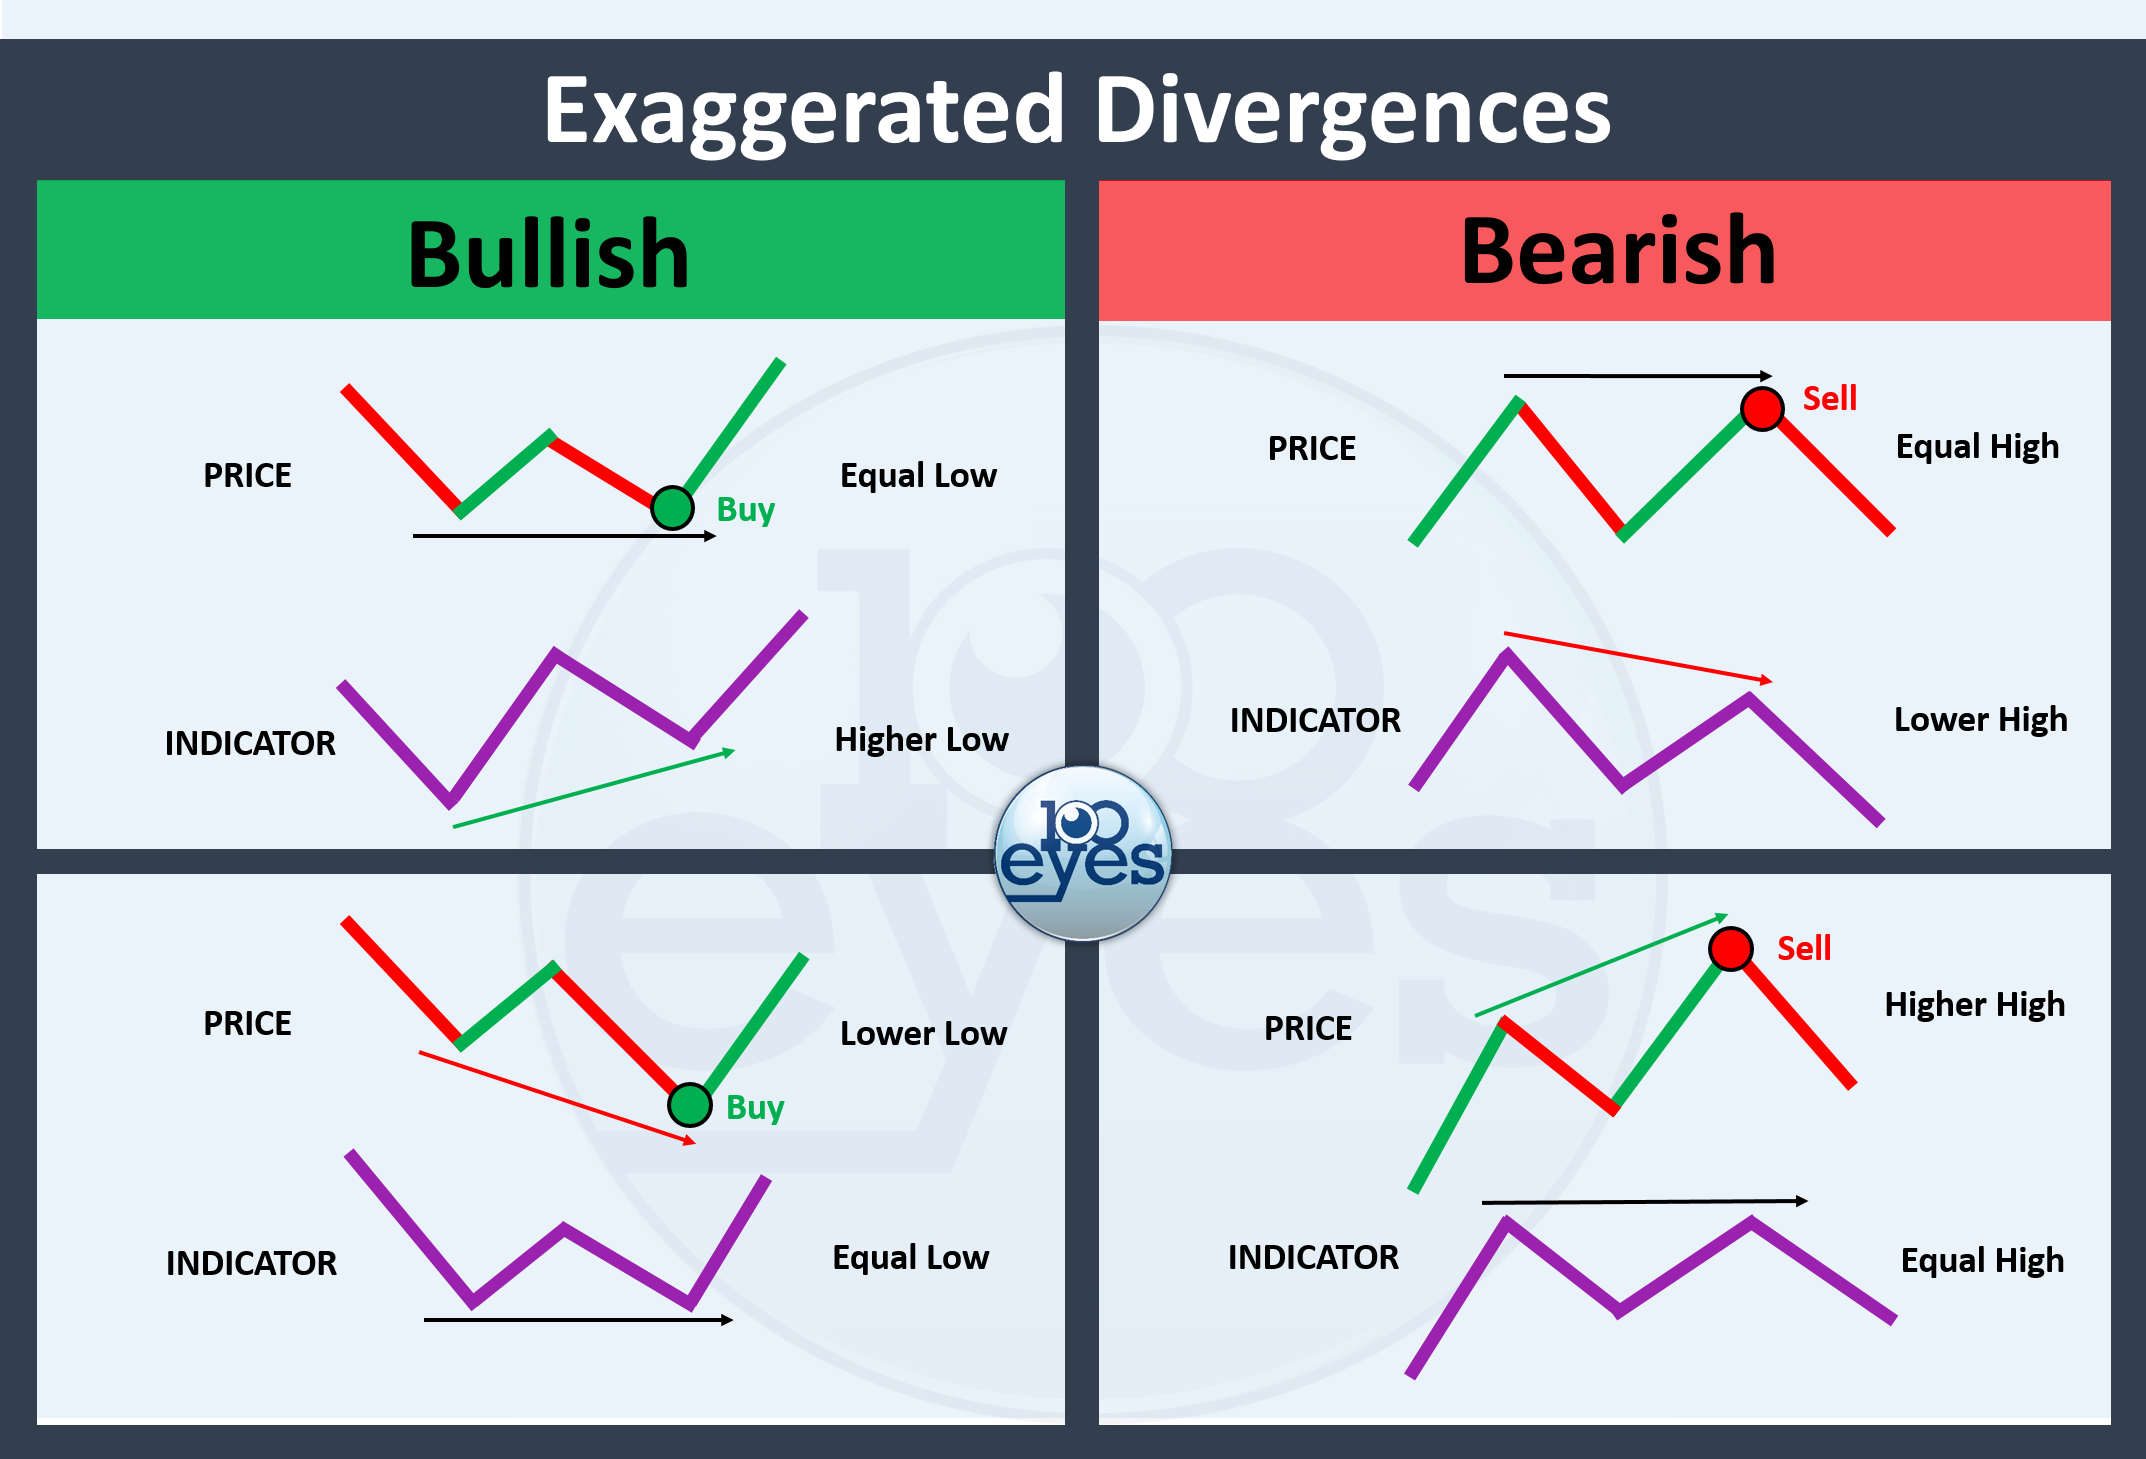 Using this cheatsheet you can quickly identify what kind of exaggerated divergence you are looking at, and whether to expected a bullish or bearish price continuation